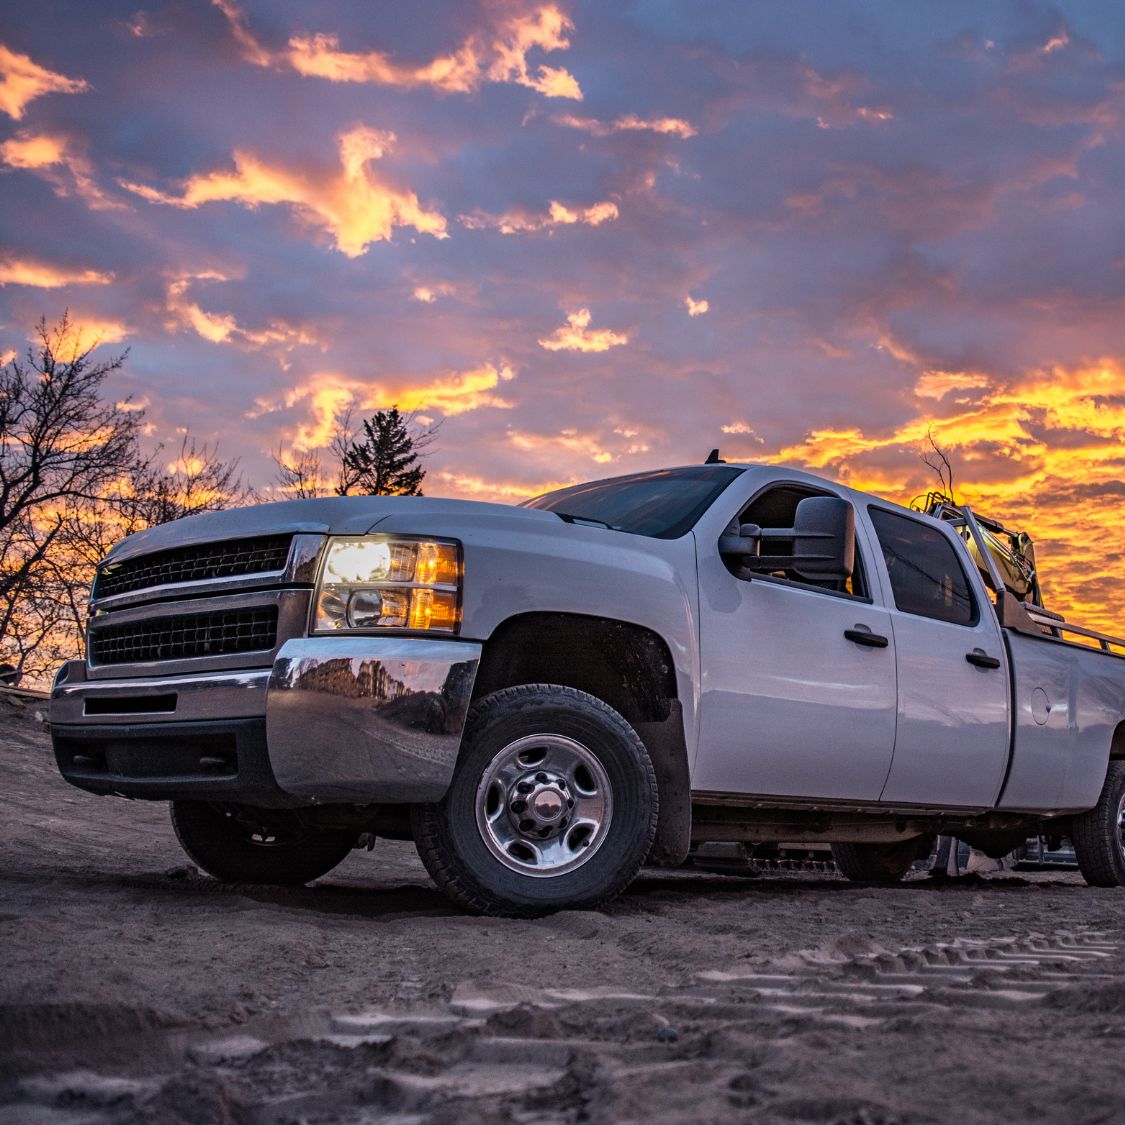 Upgrades That You Need To Improve the Look of Your Truck